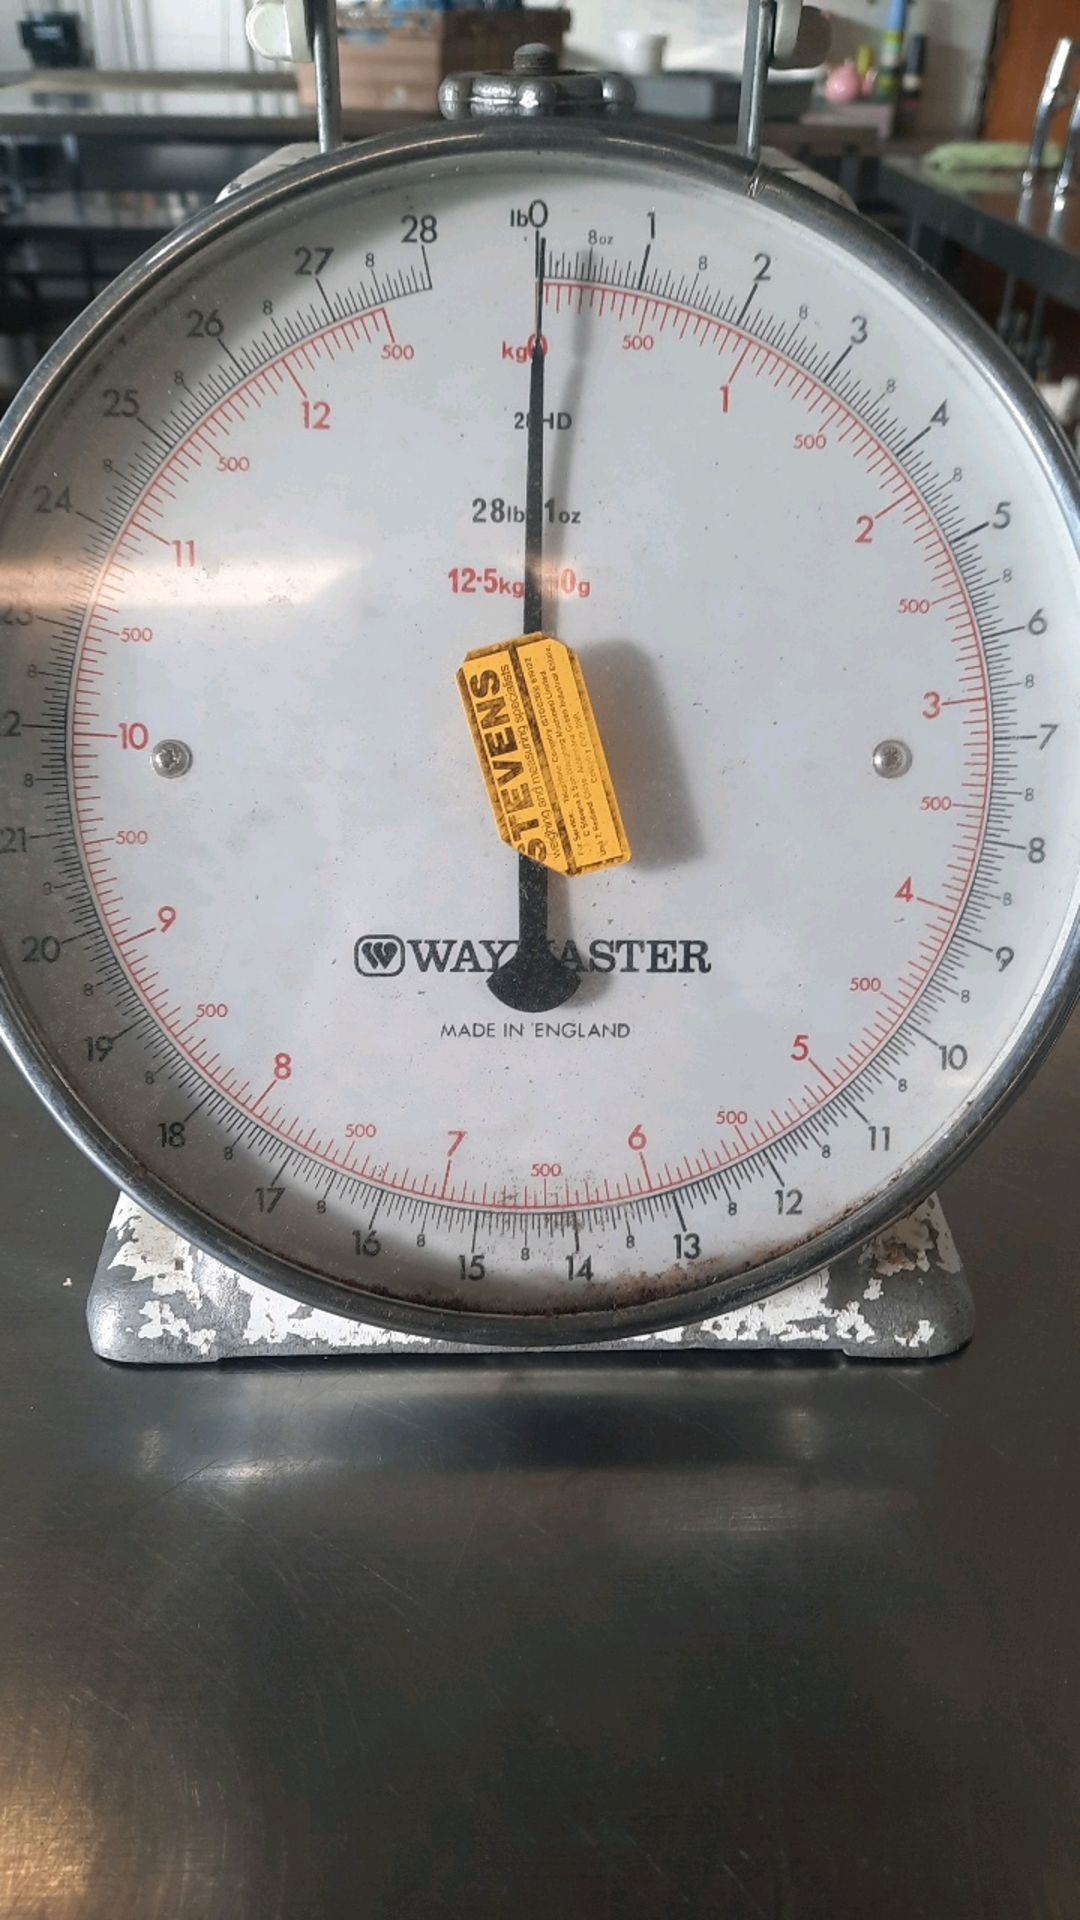 Waymaster Scales - Image 2 of 6